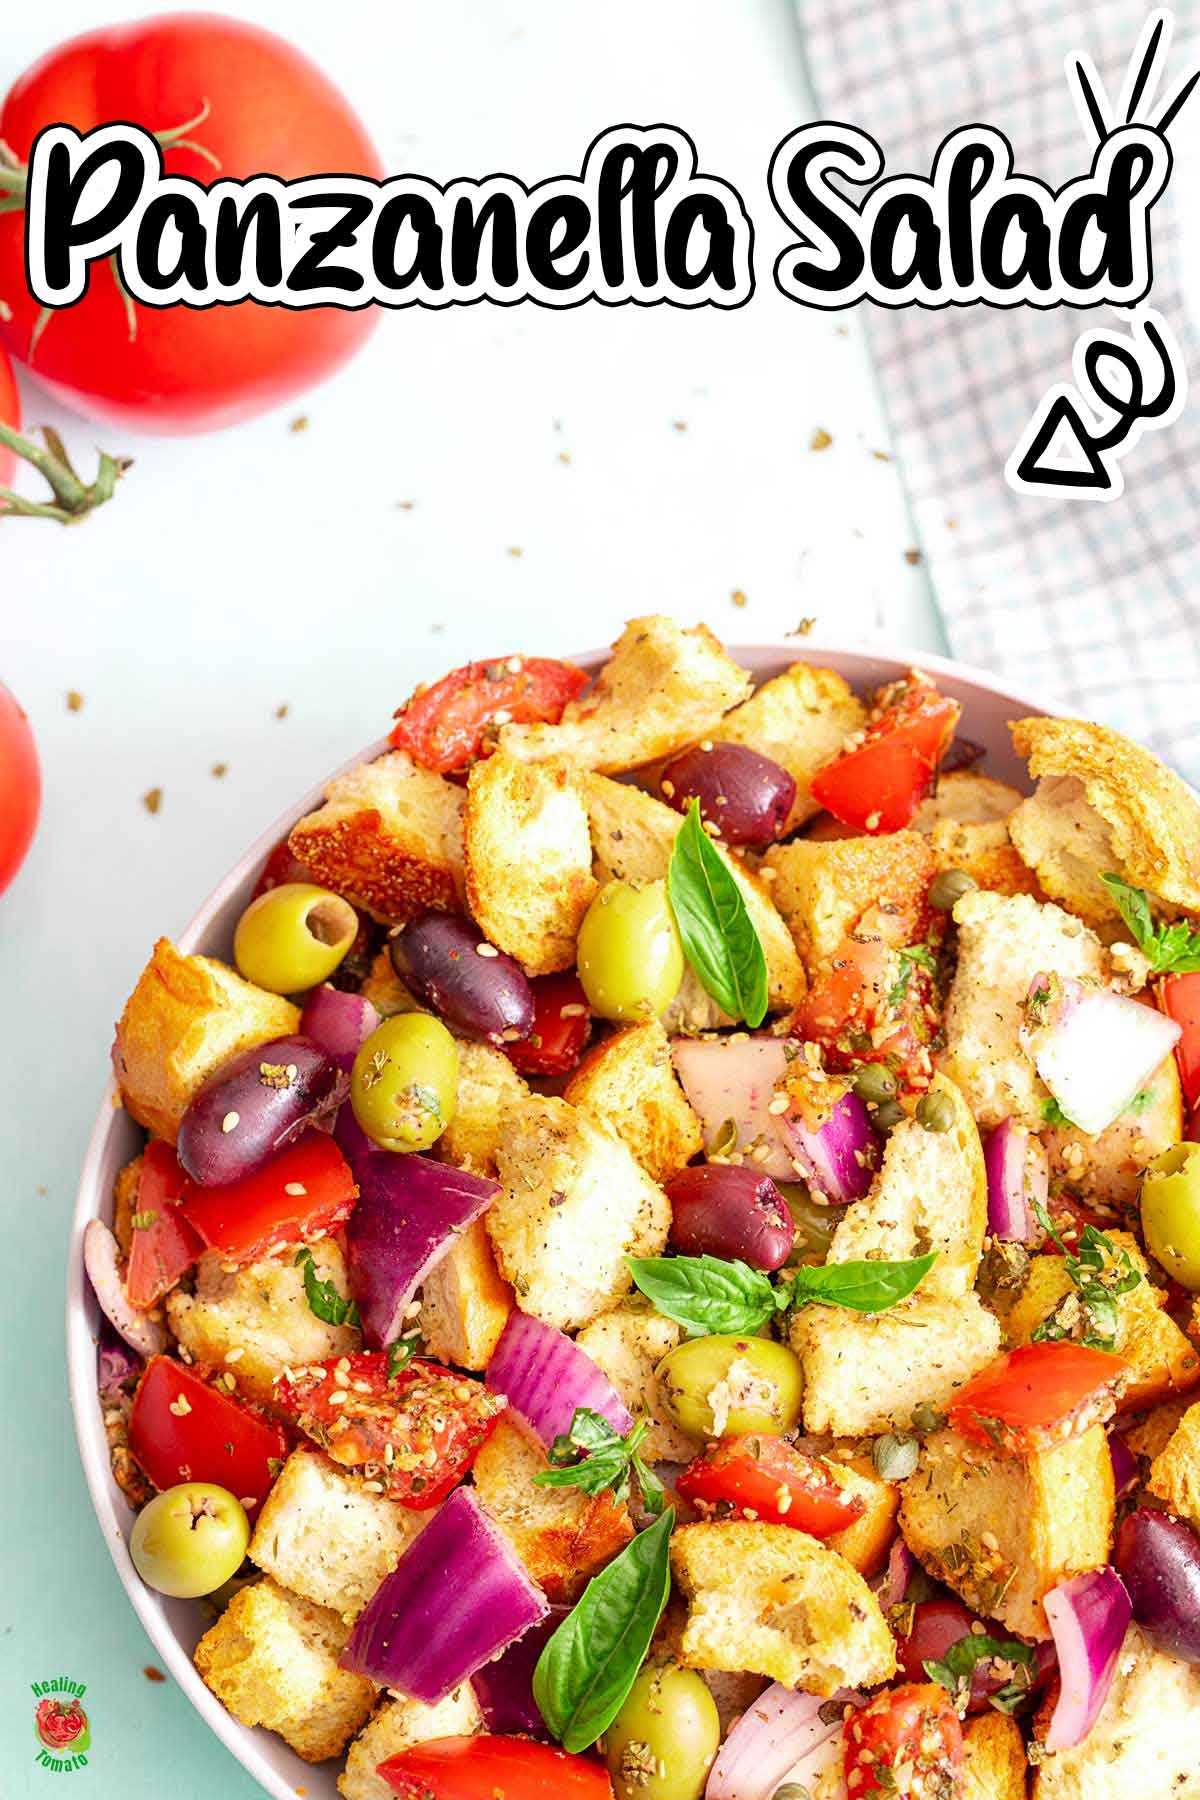 Top view of panzanella salad in a white bowl.